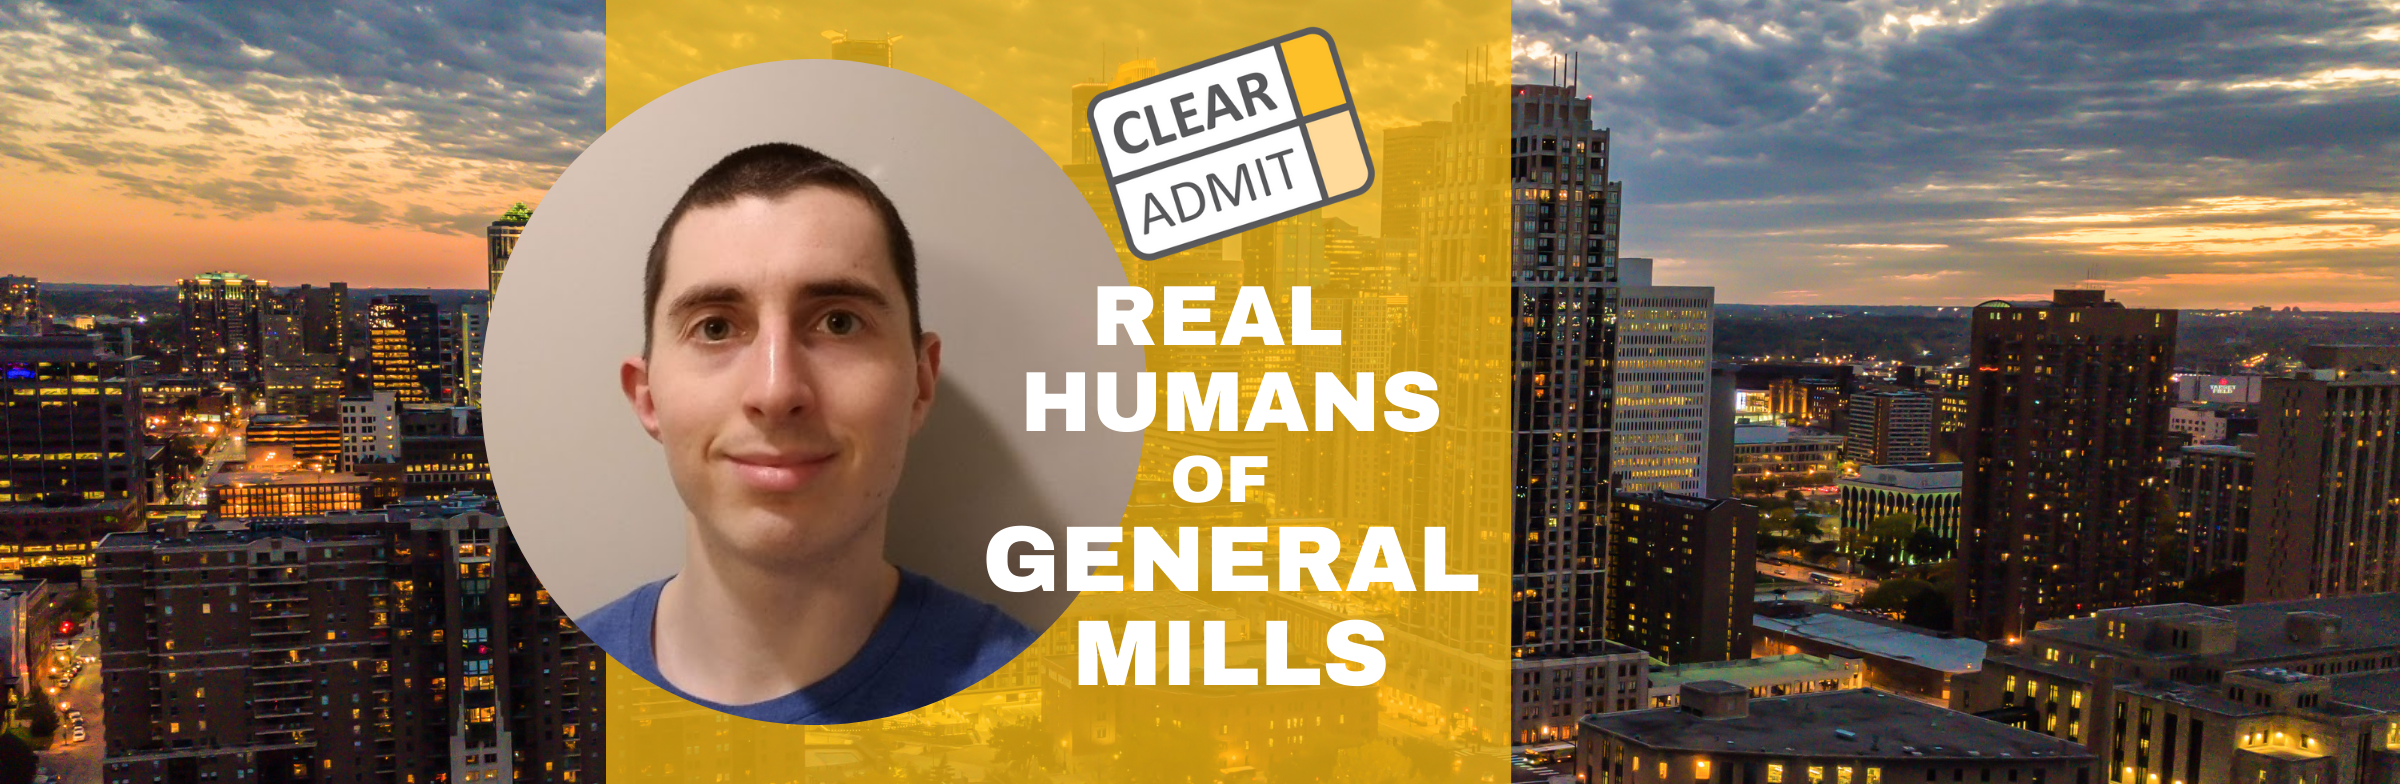 Image for Real Humans of General Mills: Matt Lieberman, Chicago Booth ‘18, Associate Brand Manager